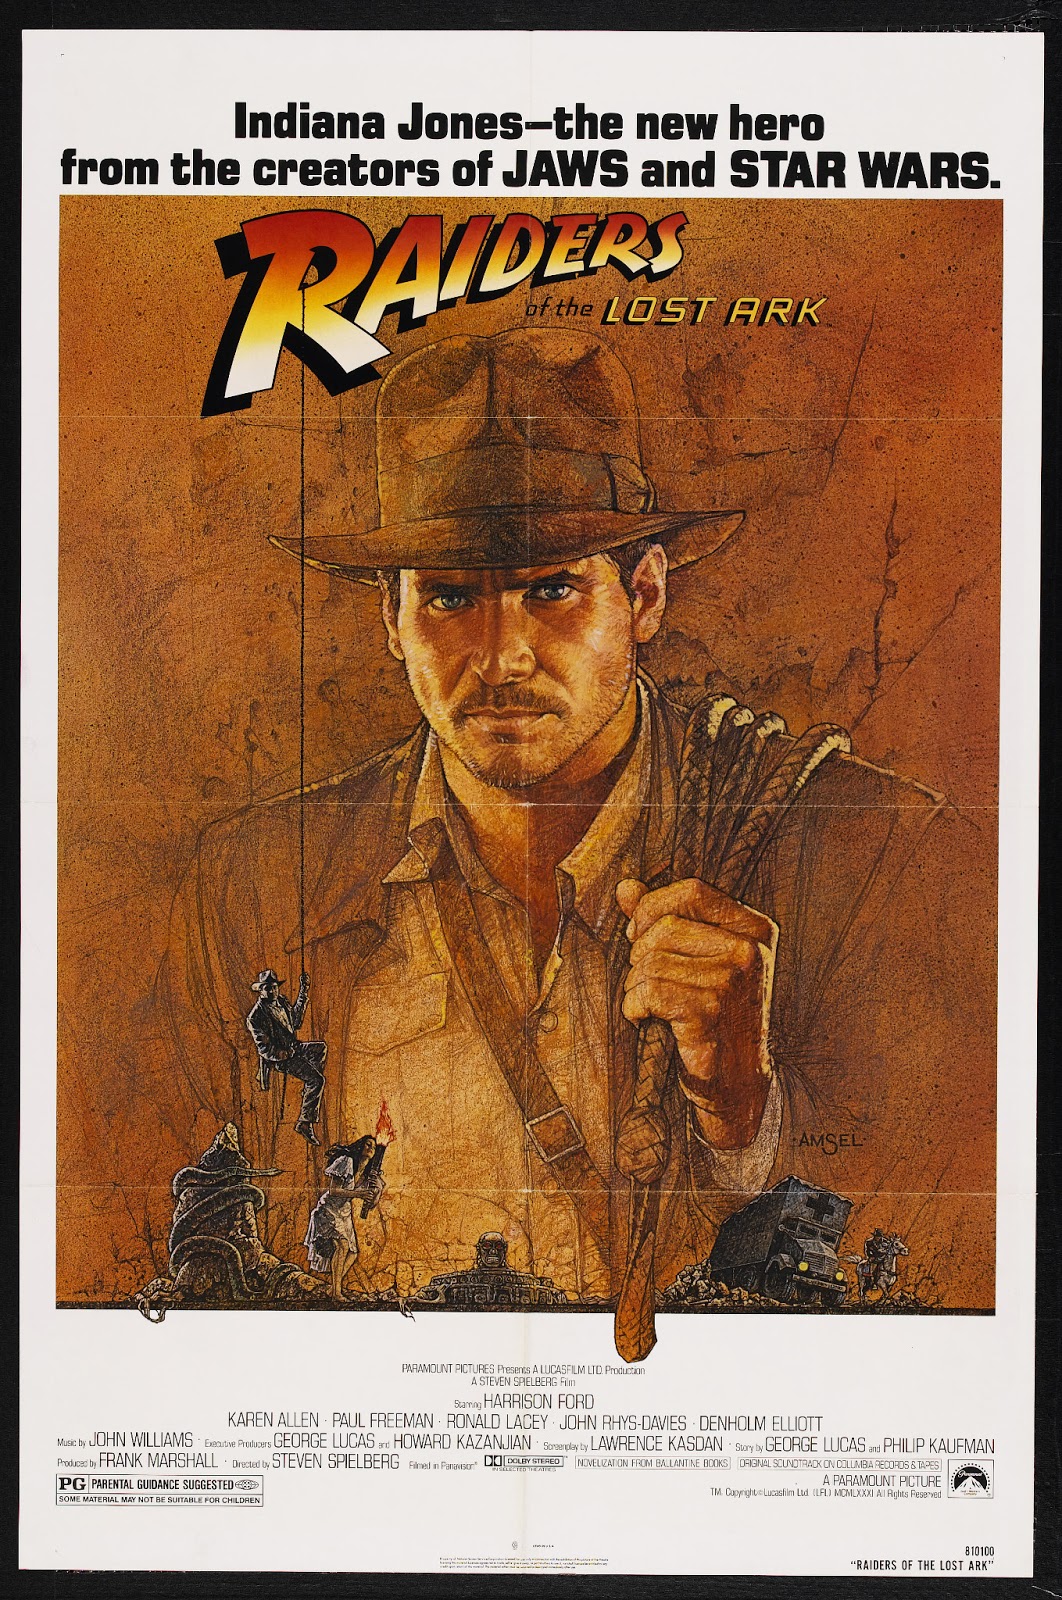 Raiders Of The Lost Ark Pics, Movie Collection